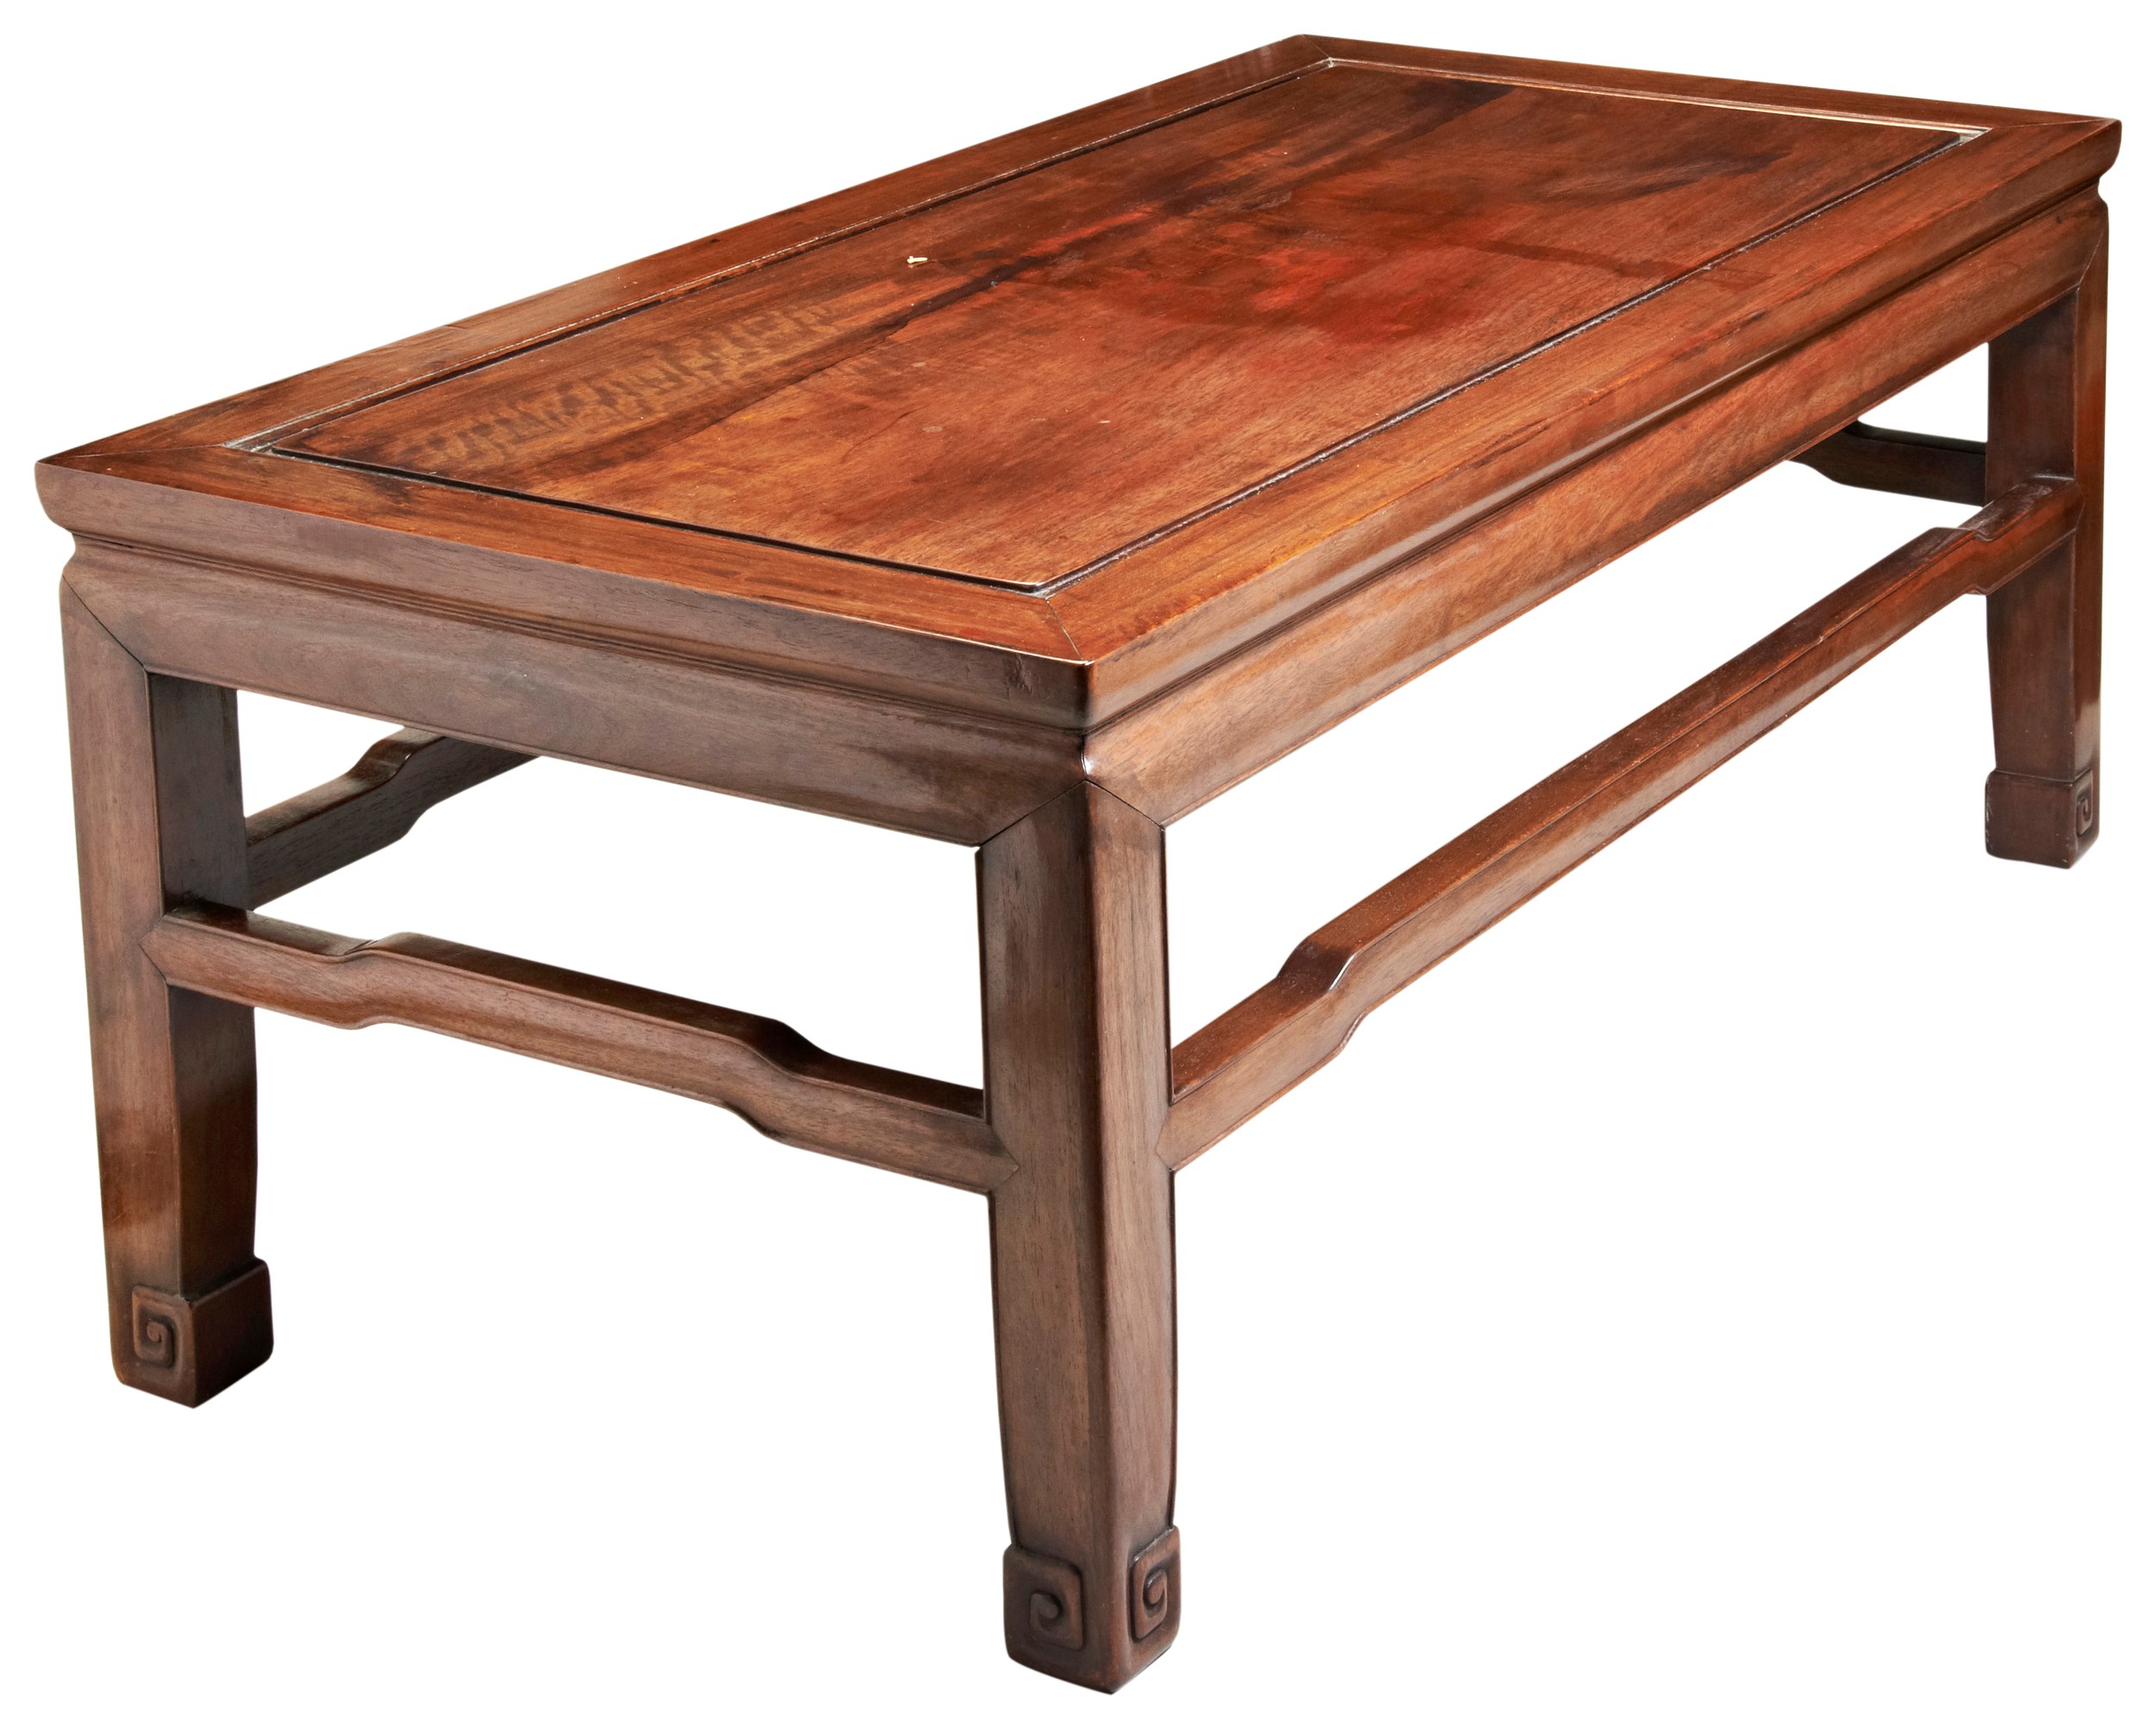 A CHINESE HARDWOOD LOW TABLE, KANG QING DYNASTY, 19TH CENTURY probably made of huali wood. 100 x